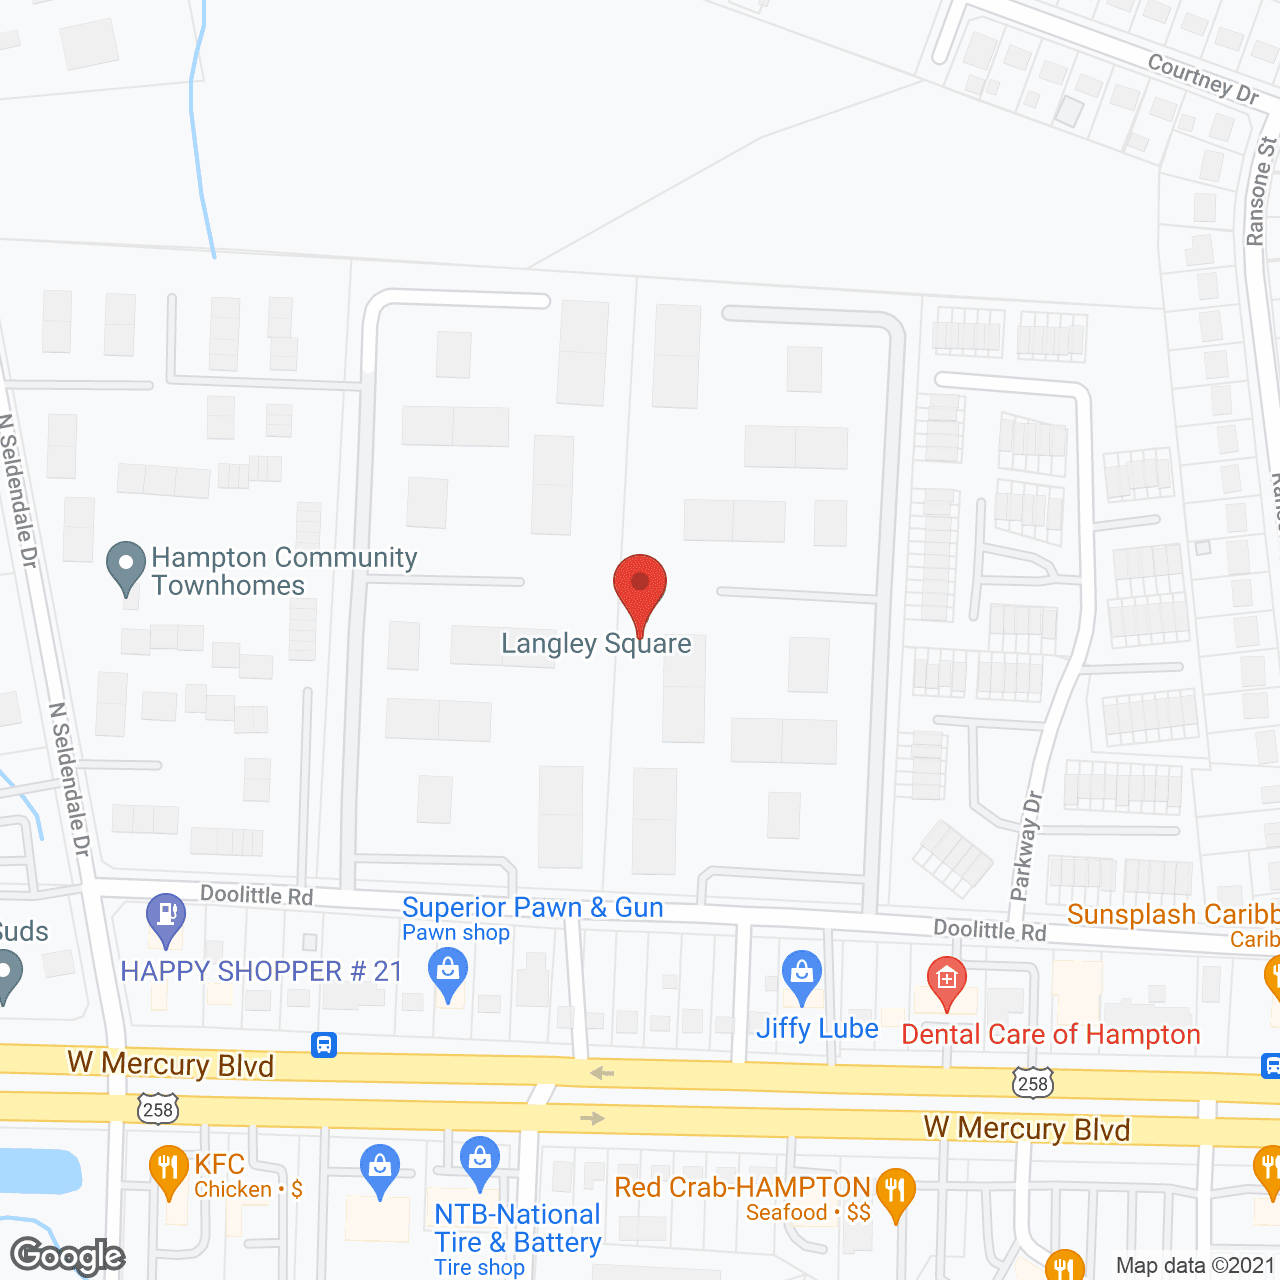 Langley Square in google map